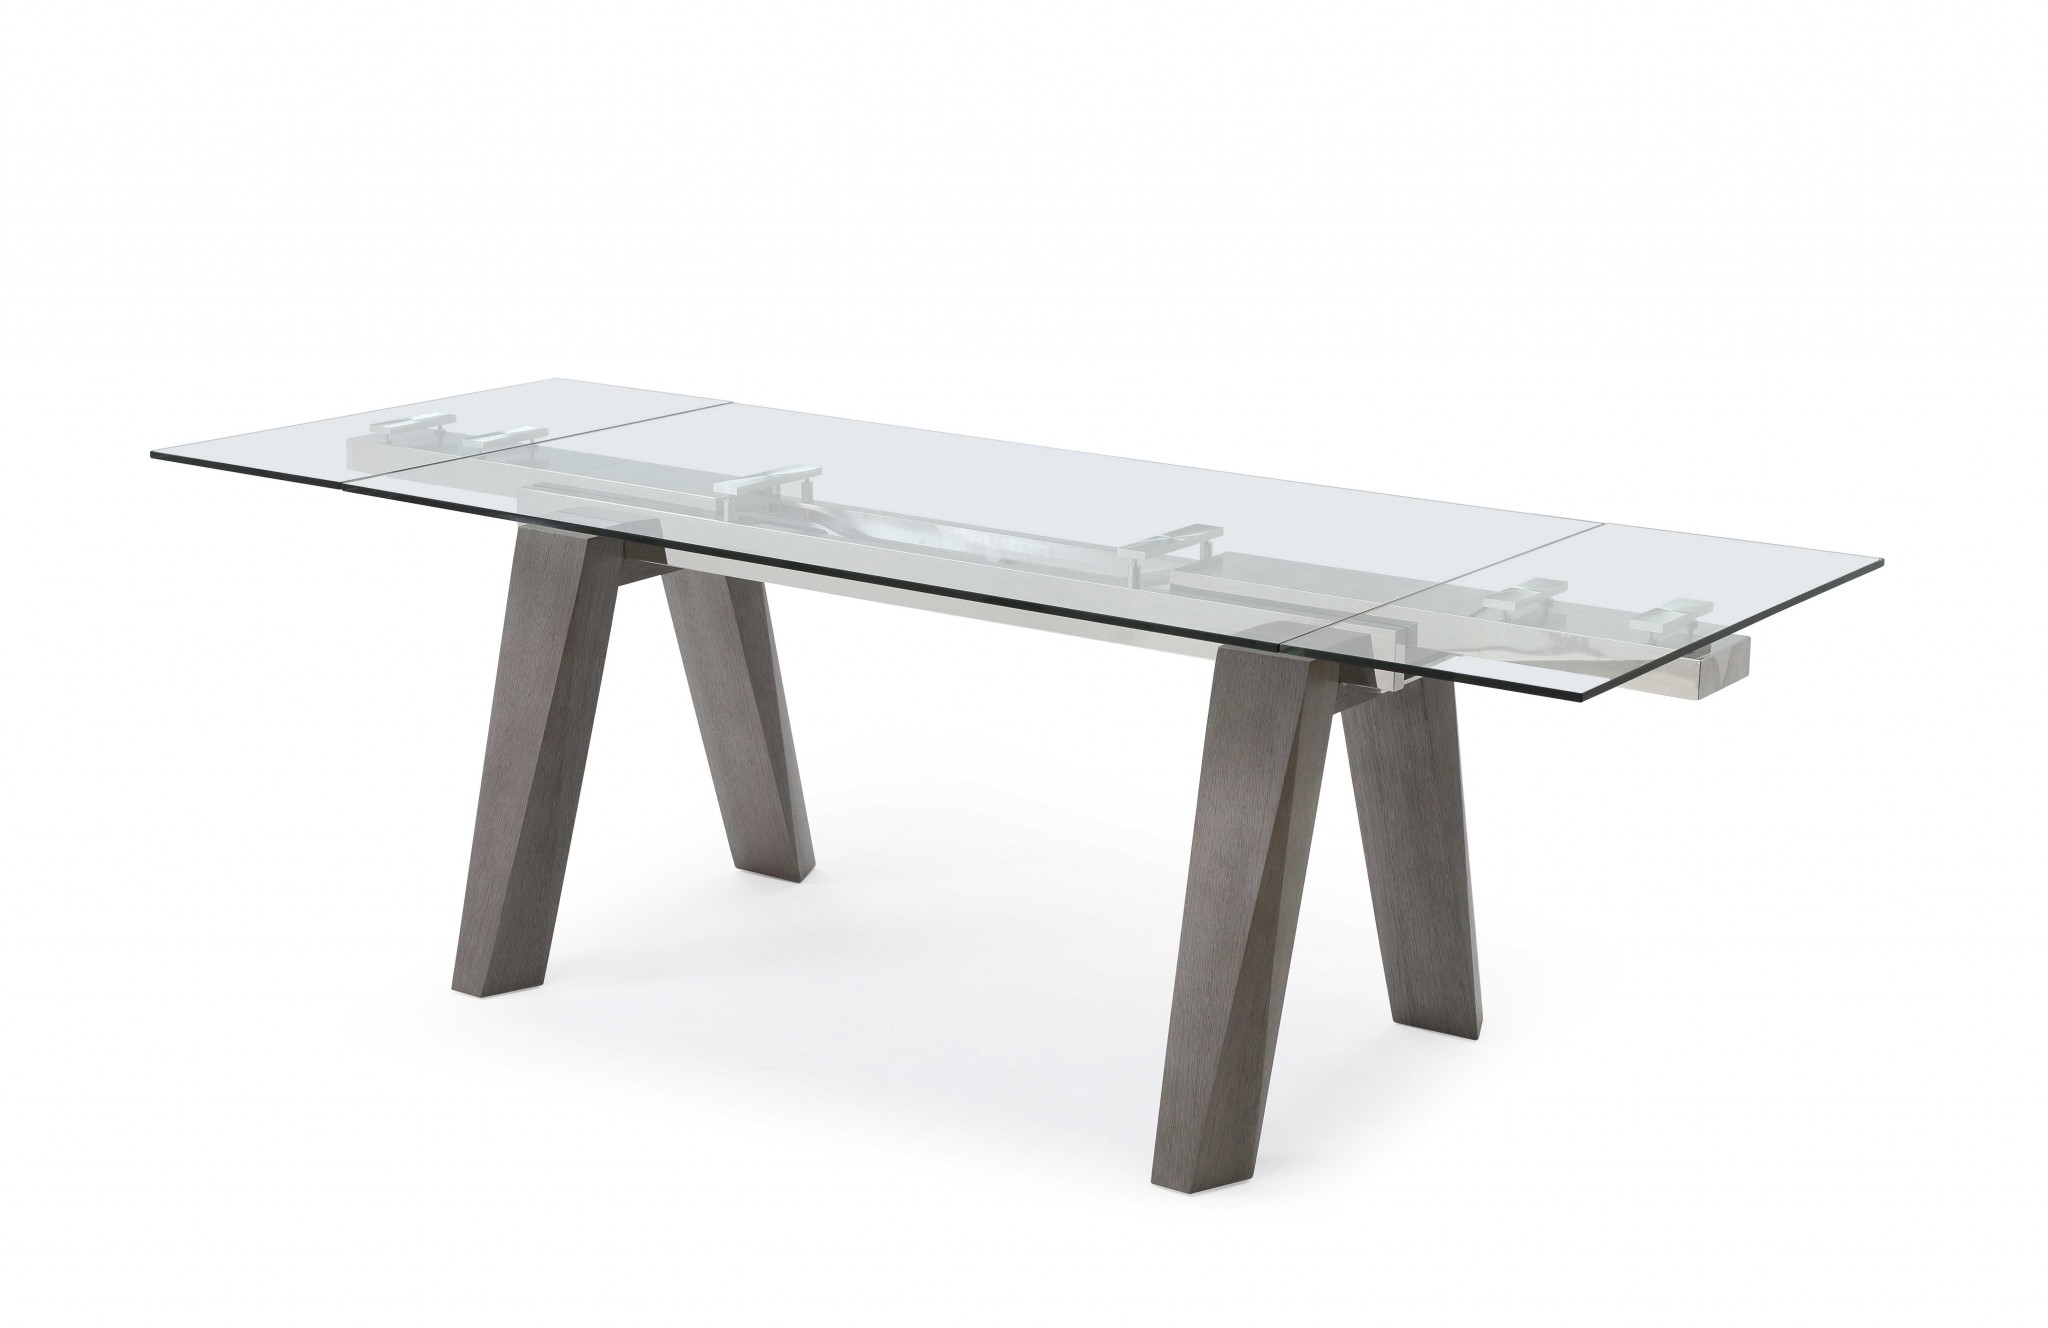 63" X 35" X 30" Grey Glass Stainless Steel Extendable Dining Table